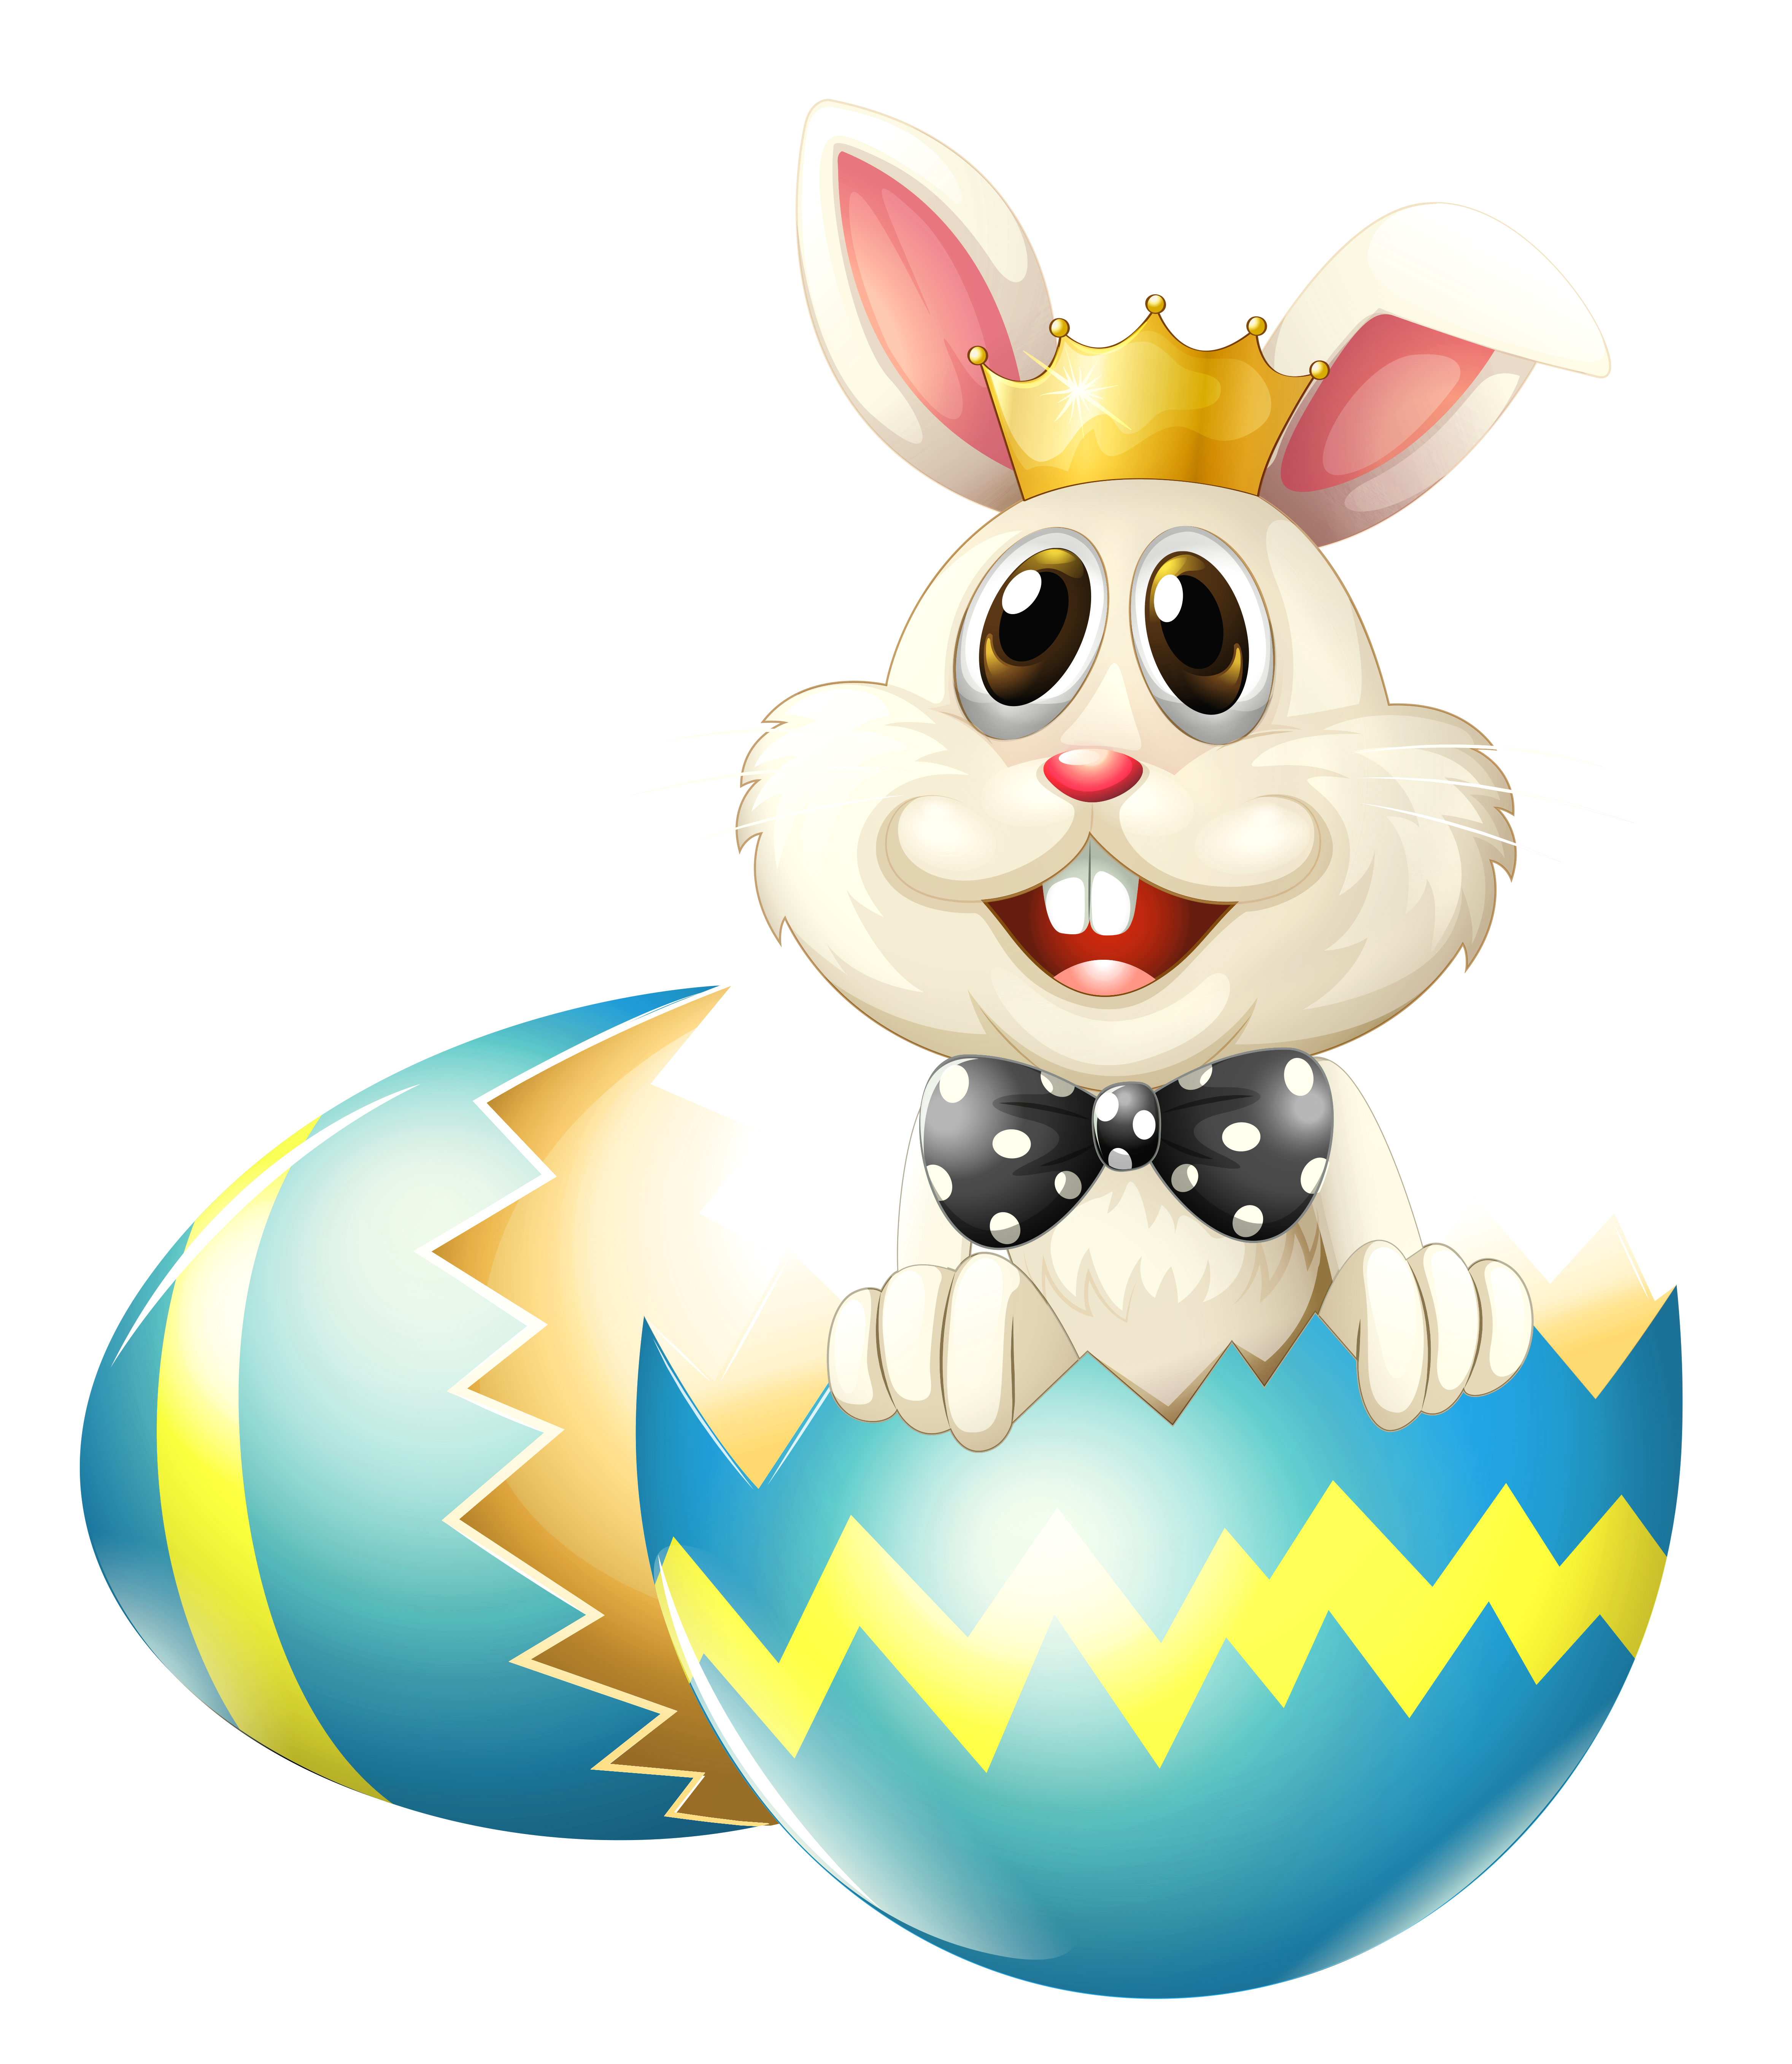 Similar Easter Bunny Png Image - Easter, Transparent background PNG HD thumbnail